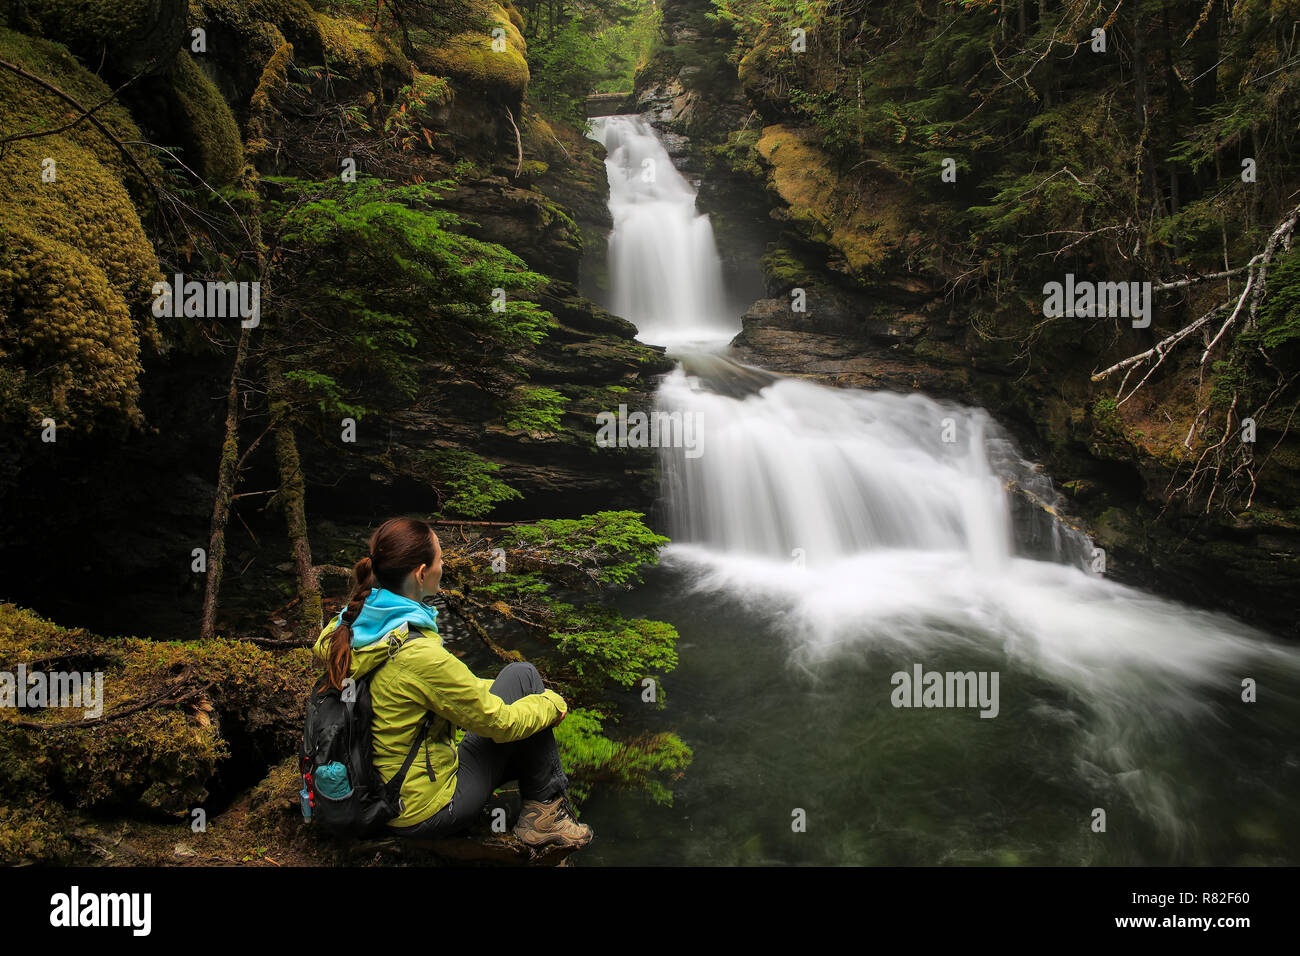 Young woman sitting by Sticta Falls in Wells Gray Provincial Park, British Columbia, Canada. It is fourth largest park in British Columbia. Stock Photo